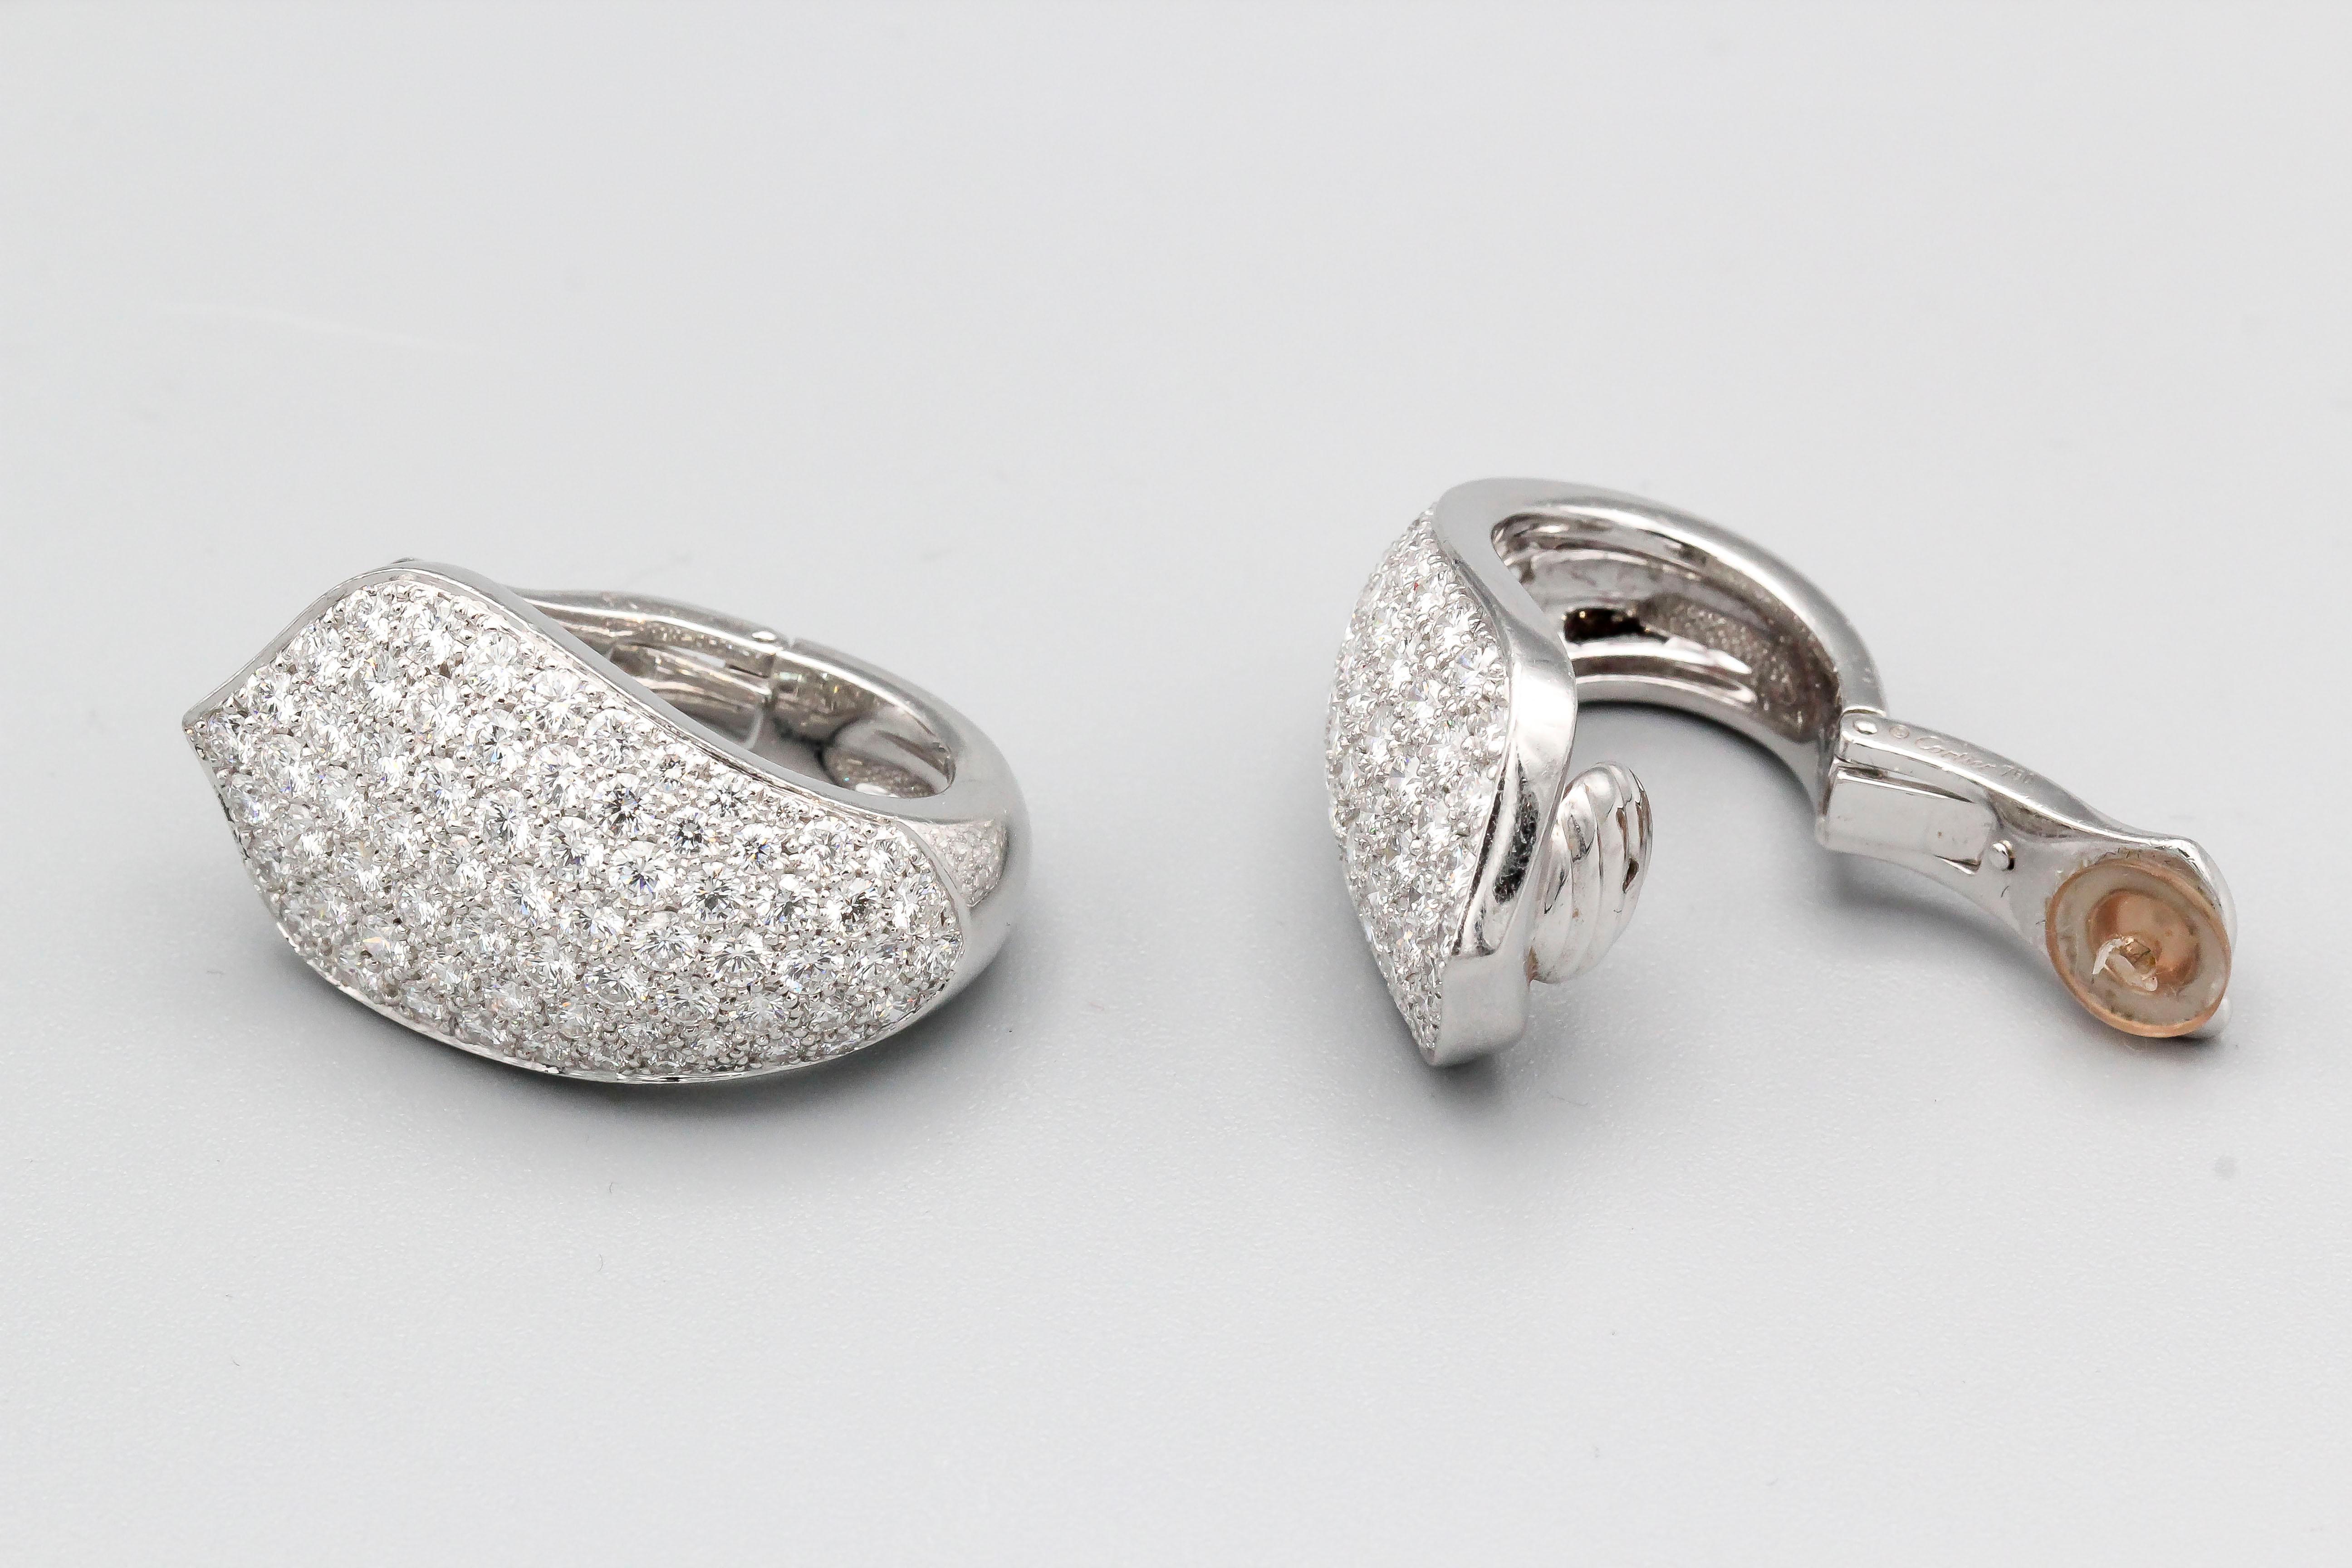 Elegant diamond and 18K white gold hoop earrings by Cartier. They feature high grade round brilliant cut diamonds, approx. 10 cts total weight.

Hallmarks: cartier, 750, copyright, reference numbers, French 18K gold assay mark, maker's mark.